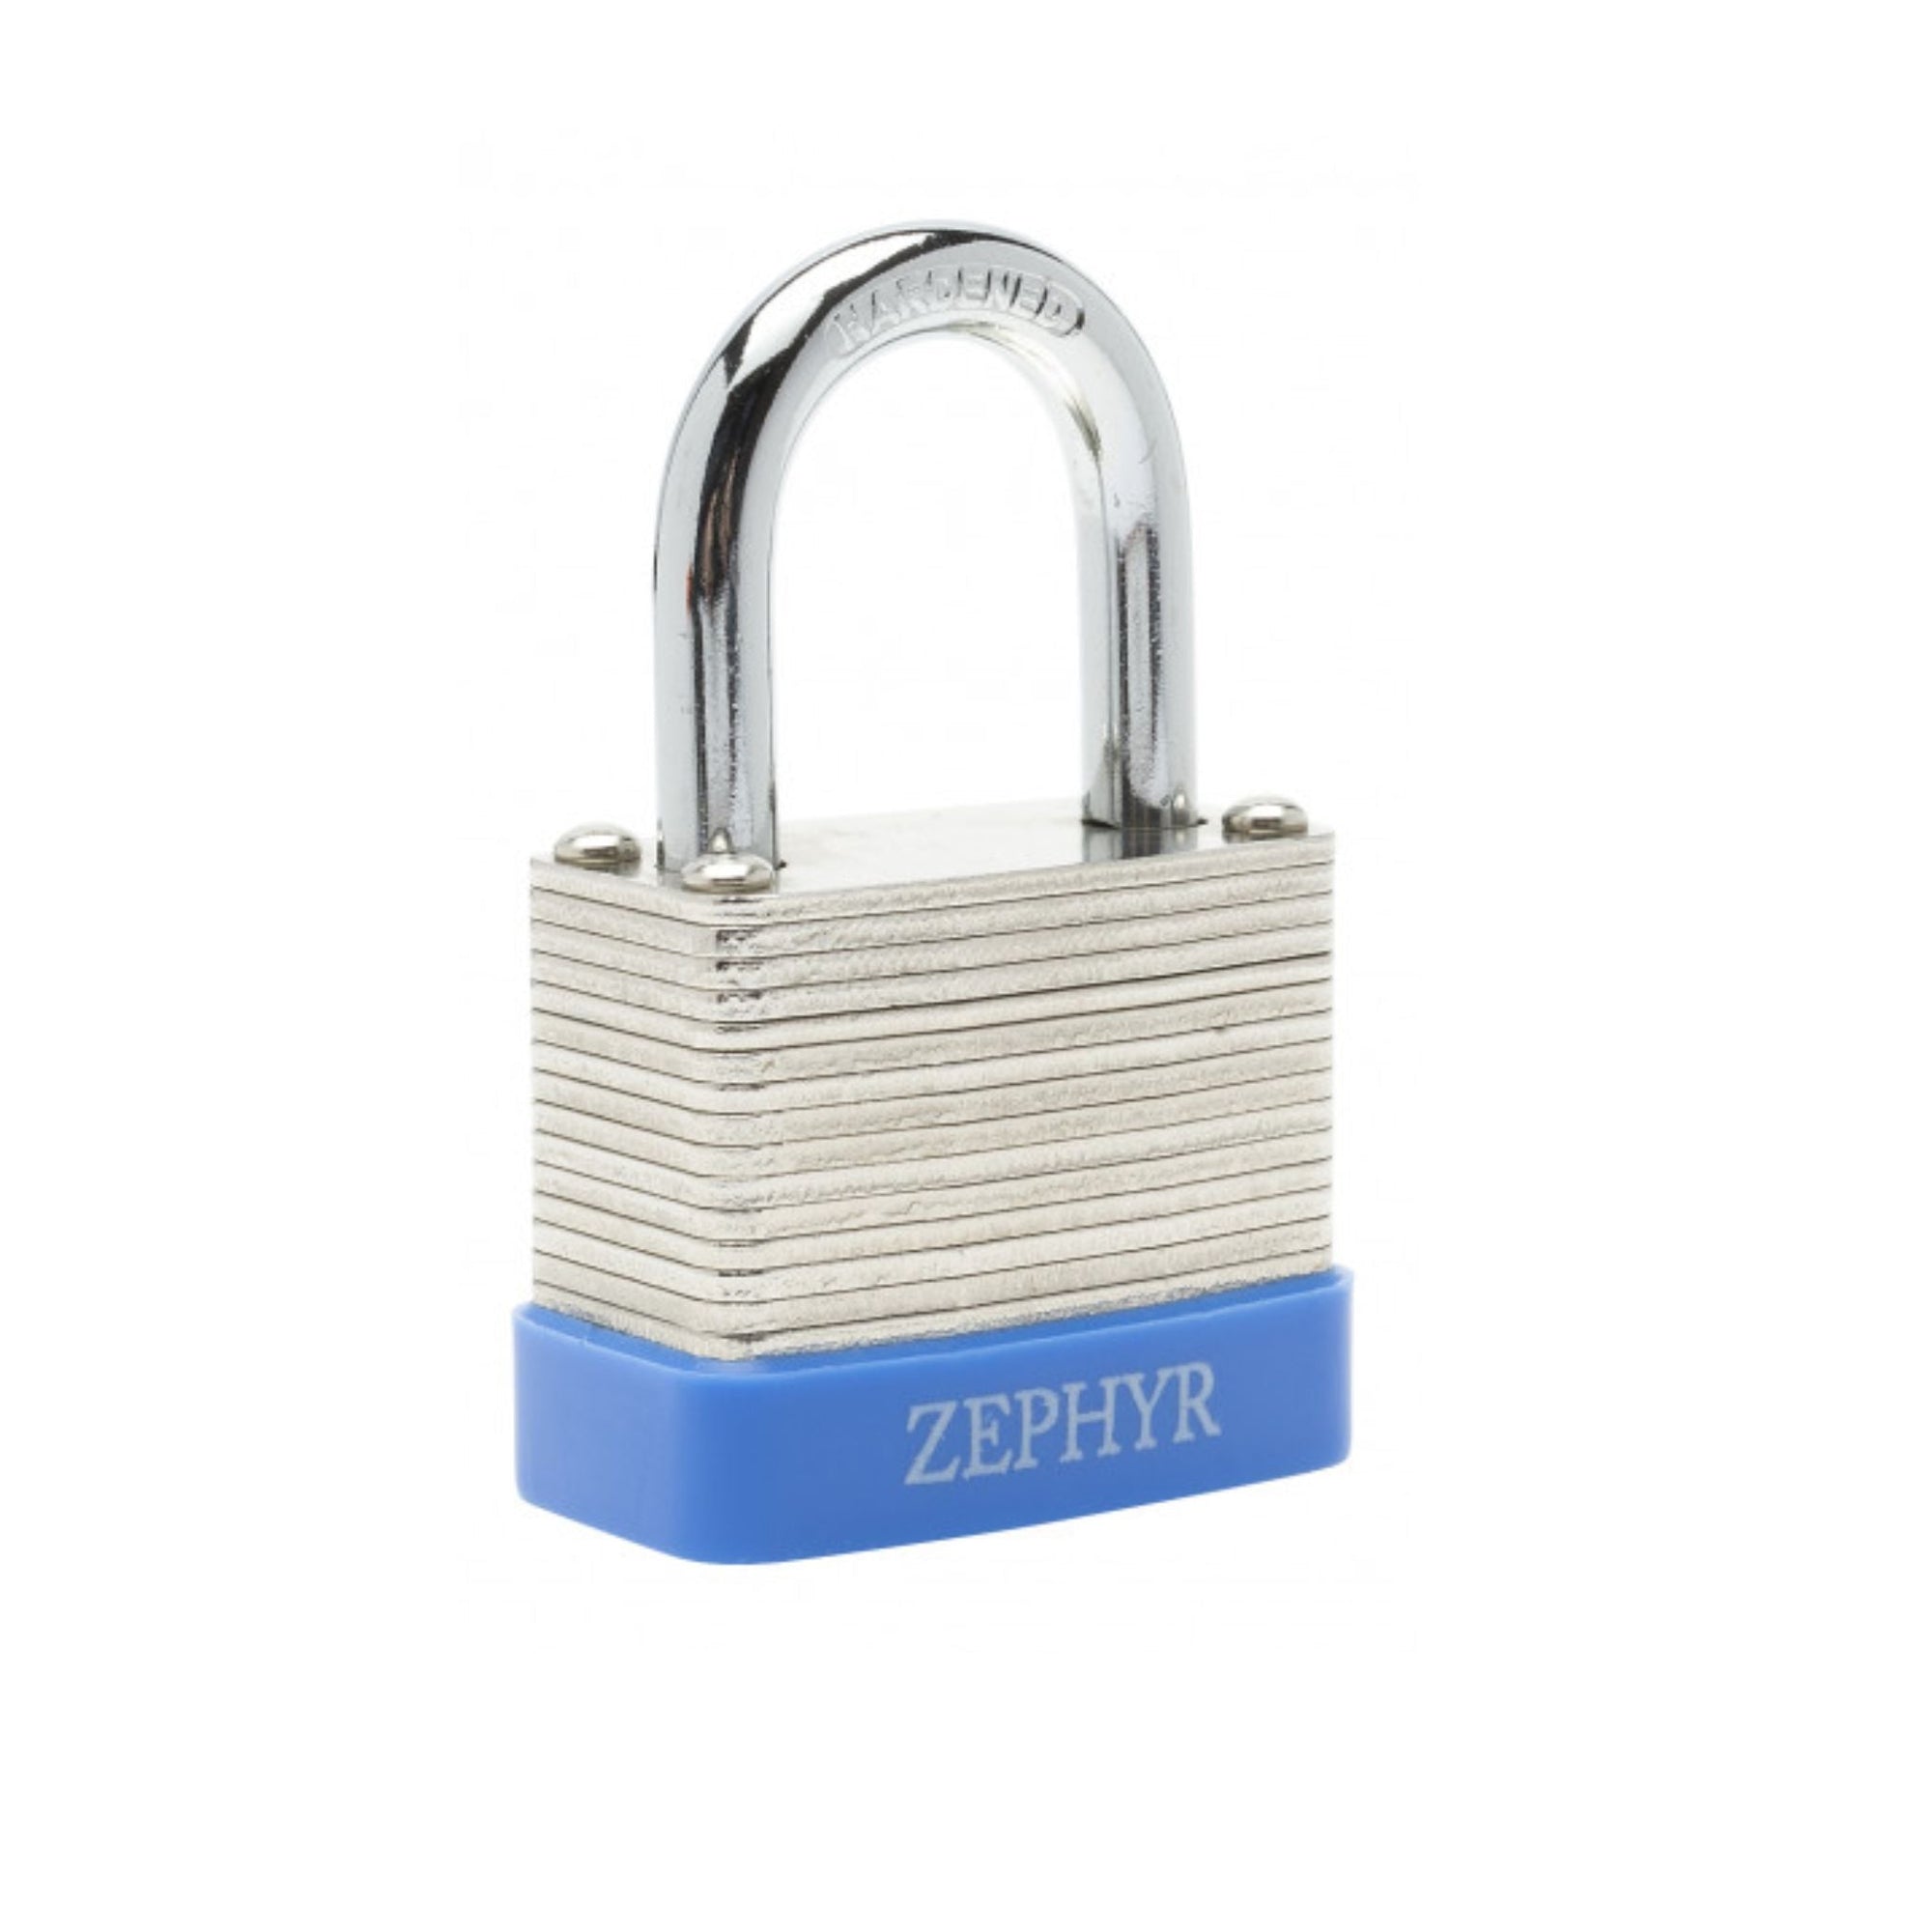 Zephyr Lock 18074 Laminated Steel Combination Padlocks Feature Resettable 3-Digit Dial Combos - The Lock Source